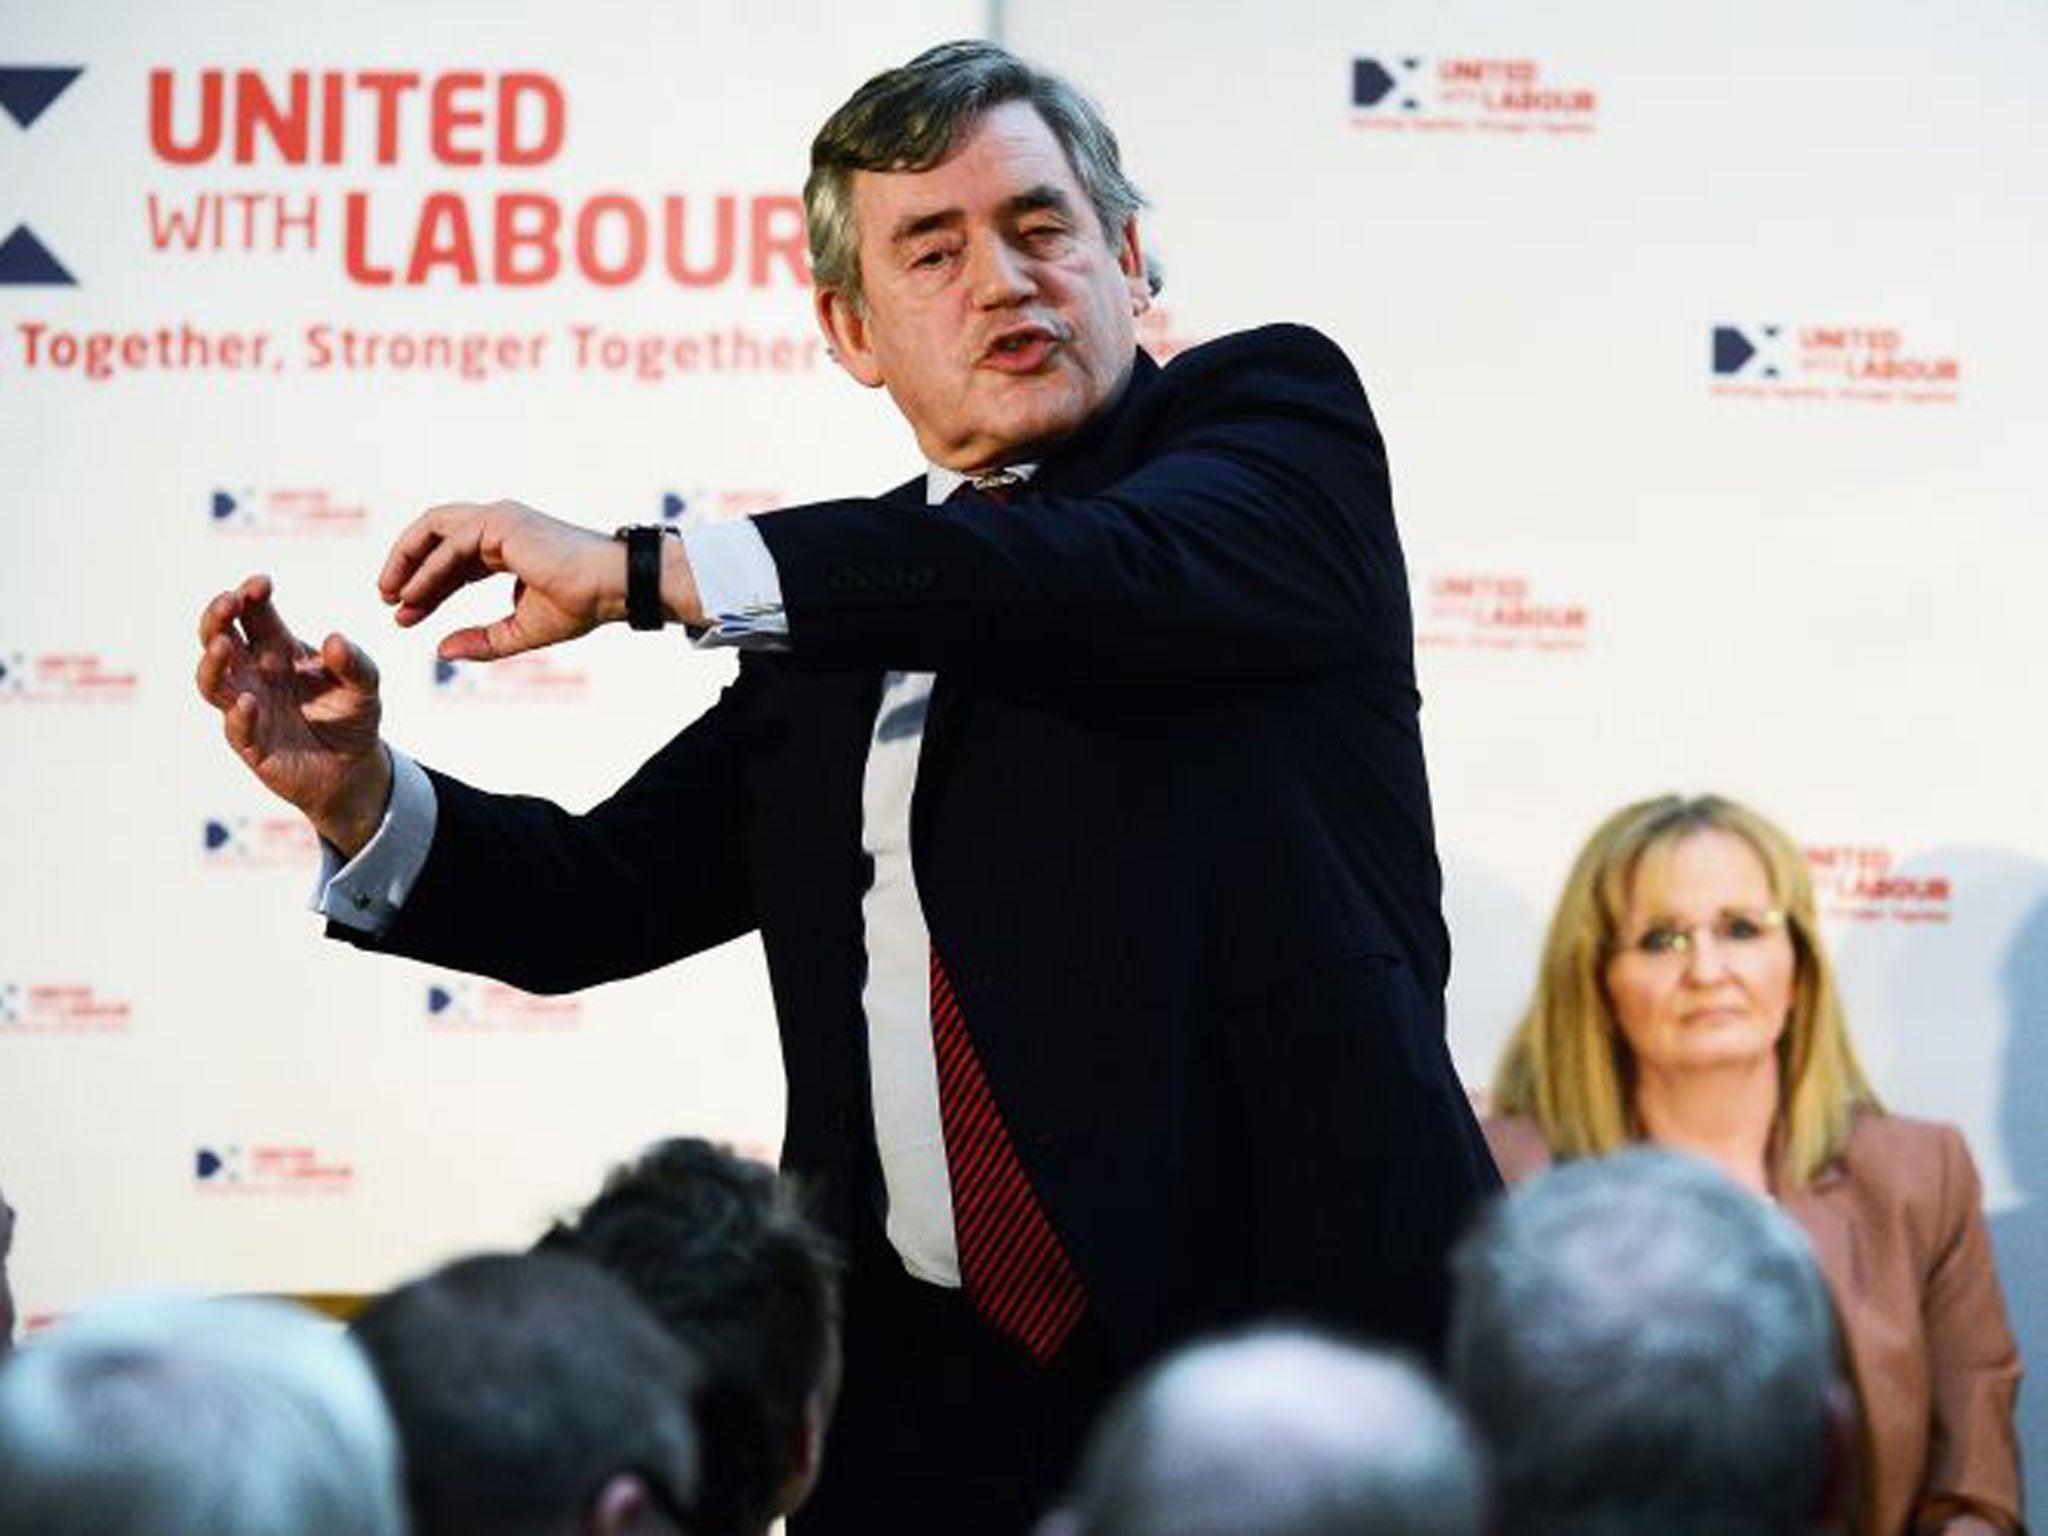 Labour is expected to endorse Gordon Brown’s proposals to give the Scottish Parliament greater powers over income tax. The former PM described a plan for a ‘partnership of equals’